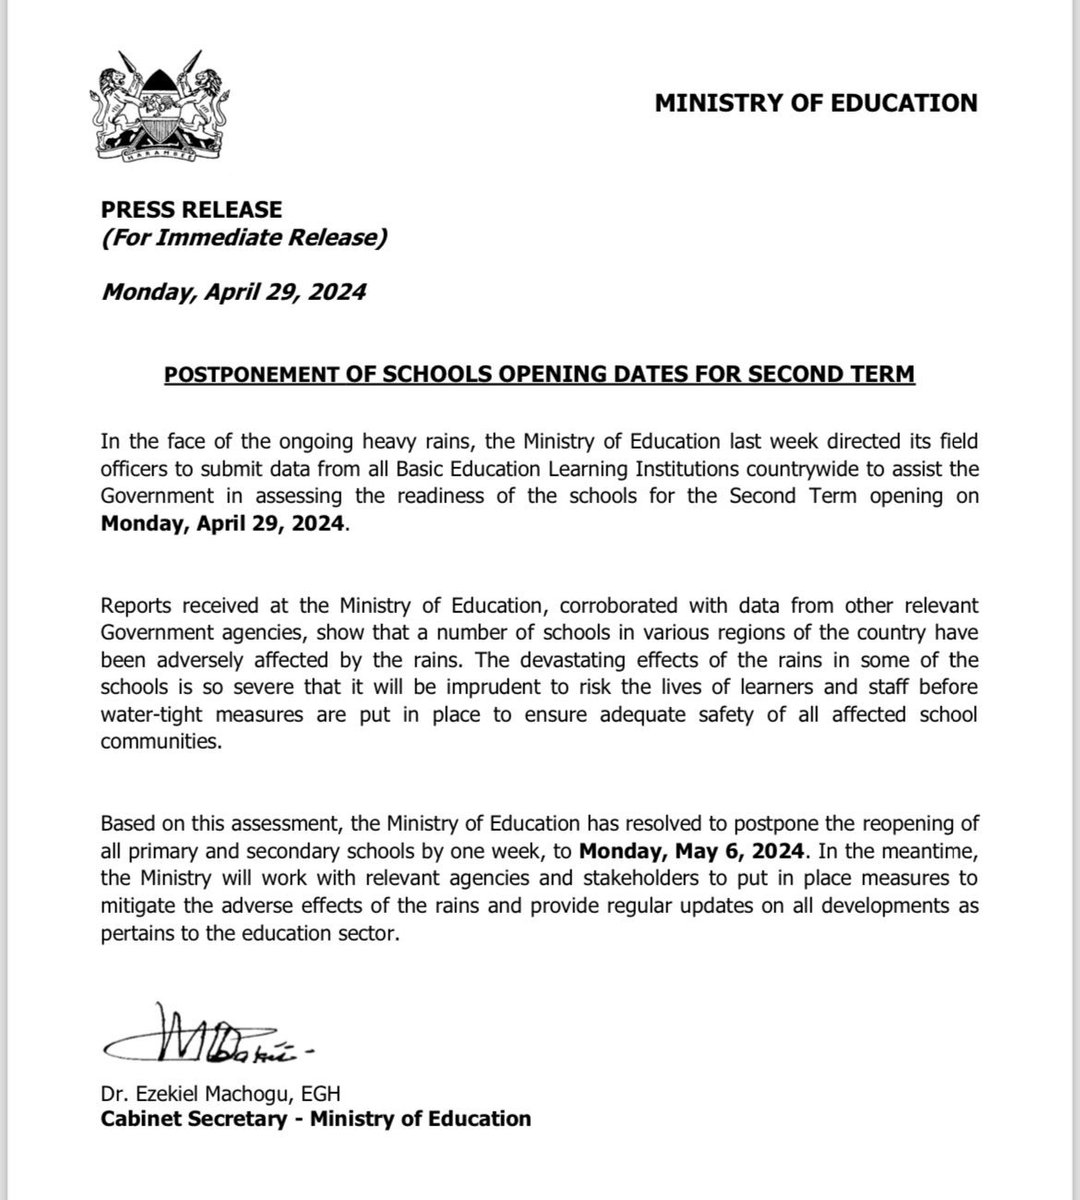 Education Cabinet Secretary Dr Ezekiel Machogu extends schools’ second term opening dates by one week to May 6, 2024 due to ongoing heavy rains